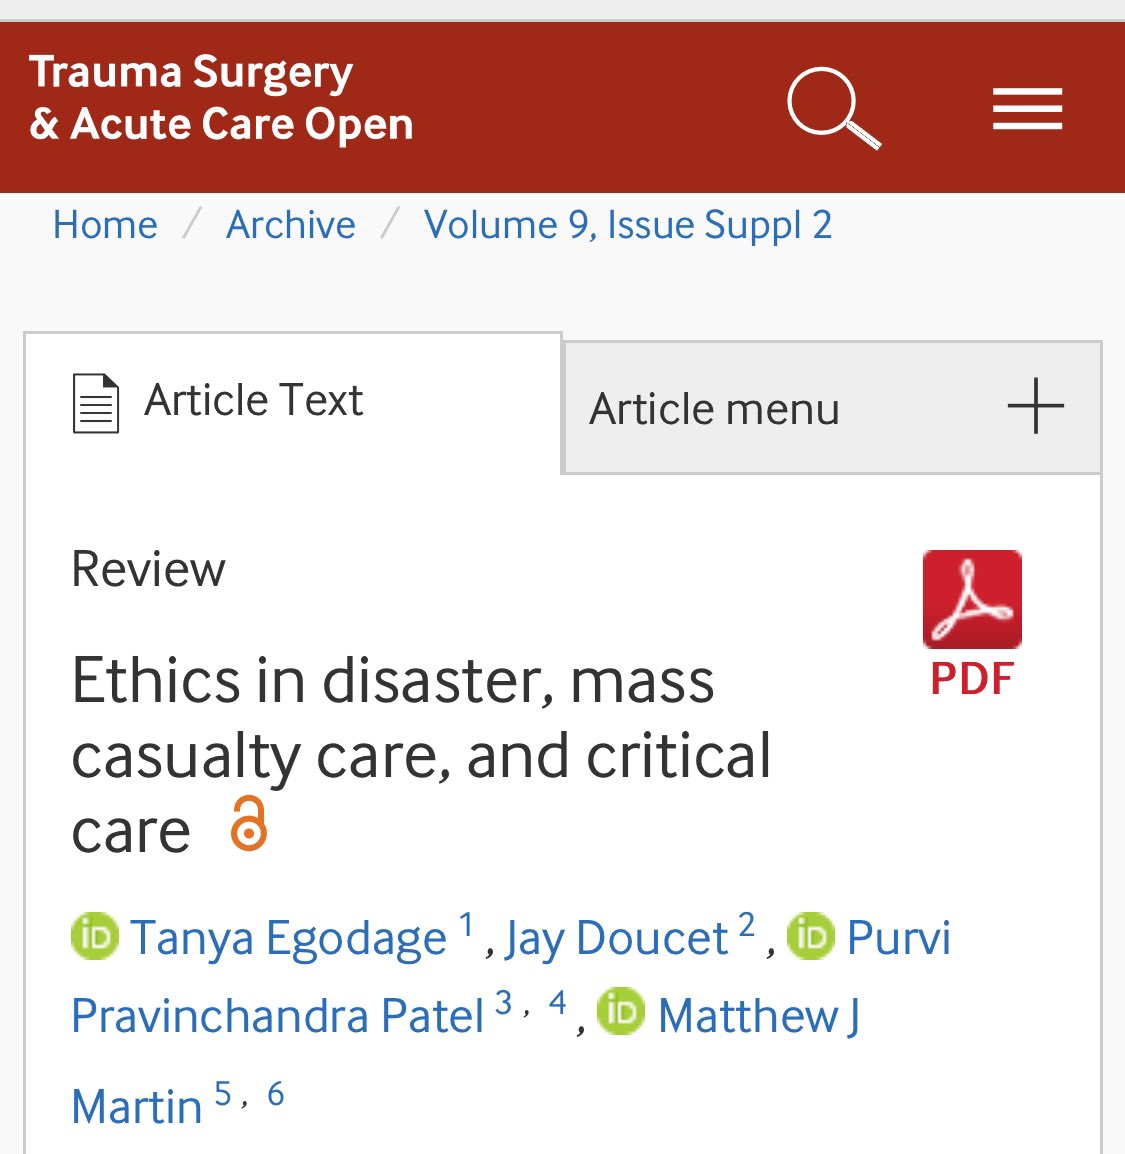 @pppatelmd @DrTanyaEgodage @docmartin22 @PMHTrauma_ALE @kmattox1 @TCCACS Great paper by @DrTanyaEgodage @jaydoucet @pppatelmd @docmartin22 in #TSACO based on panel at @TCCACS Medical Disaster Response Response Course #TCCACS24 #TCCACS2024 “Ethics in disaster, mass casualty care, and critical care” tsaco.bmj.com/content/9/Supp…